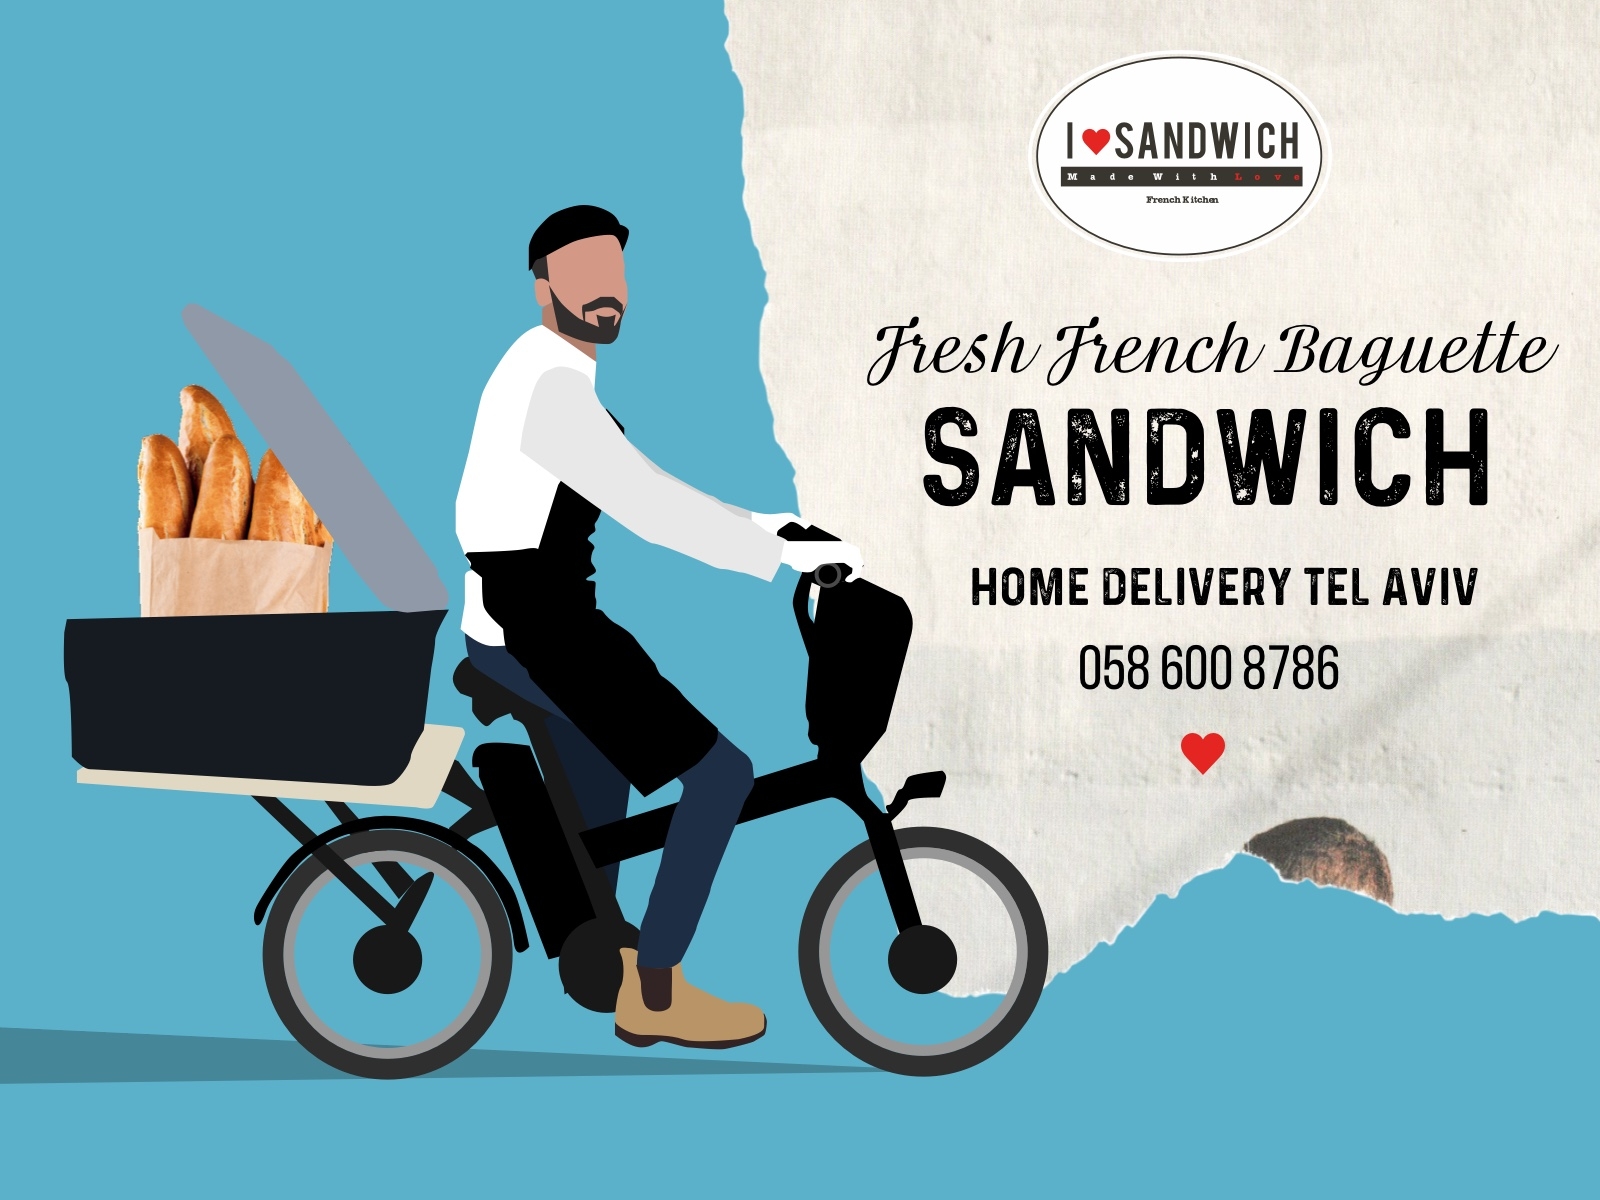 The Sandwich Guy by Anathdesign on Dribbble